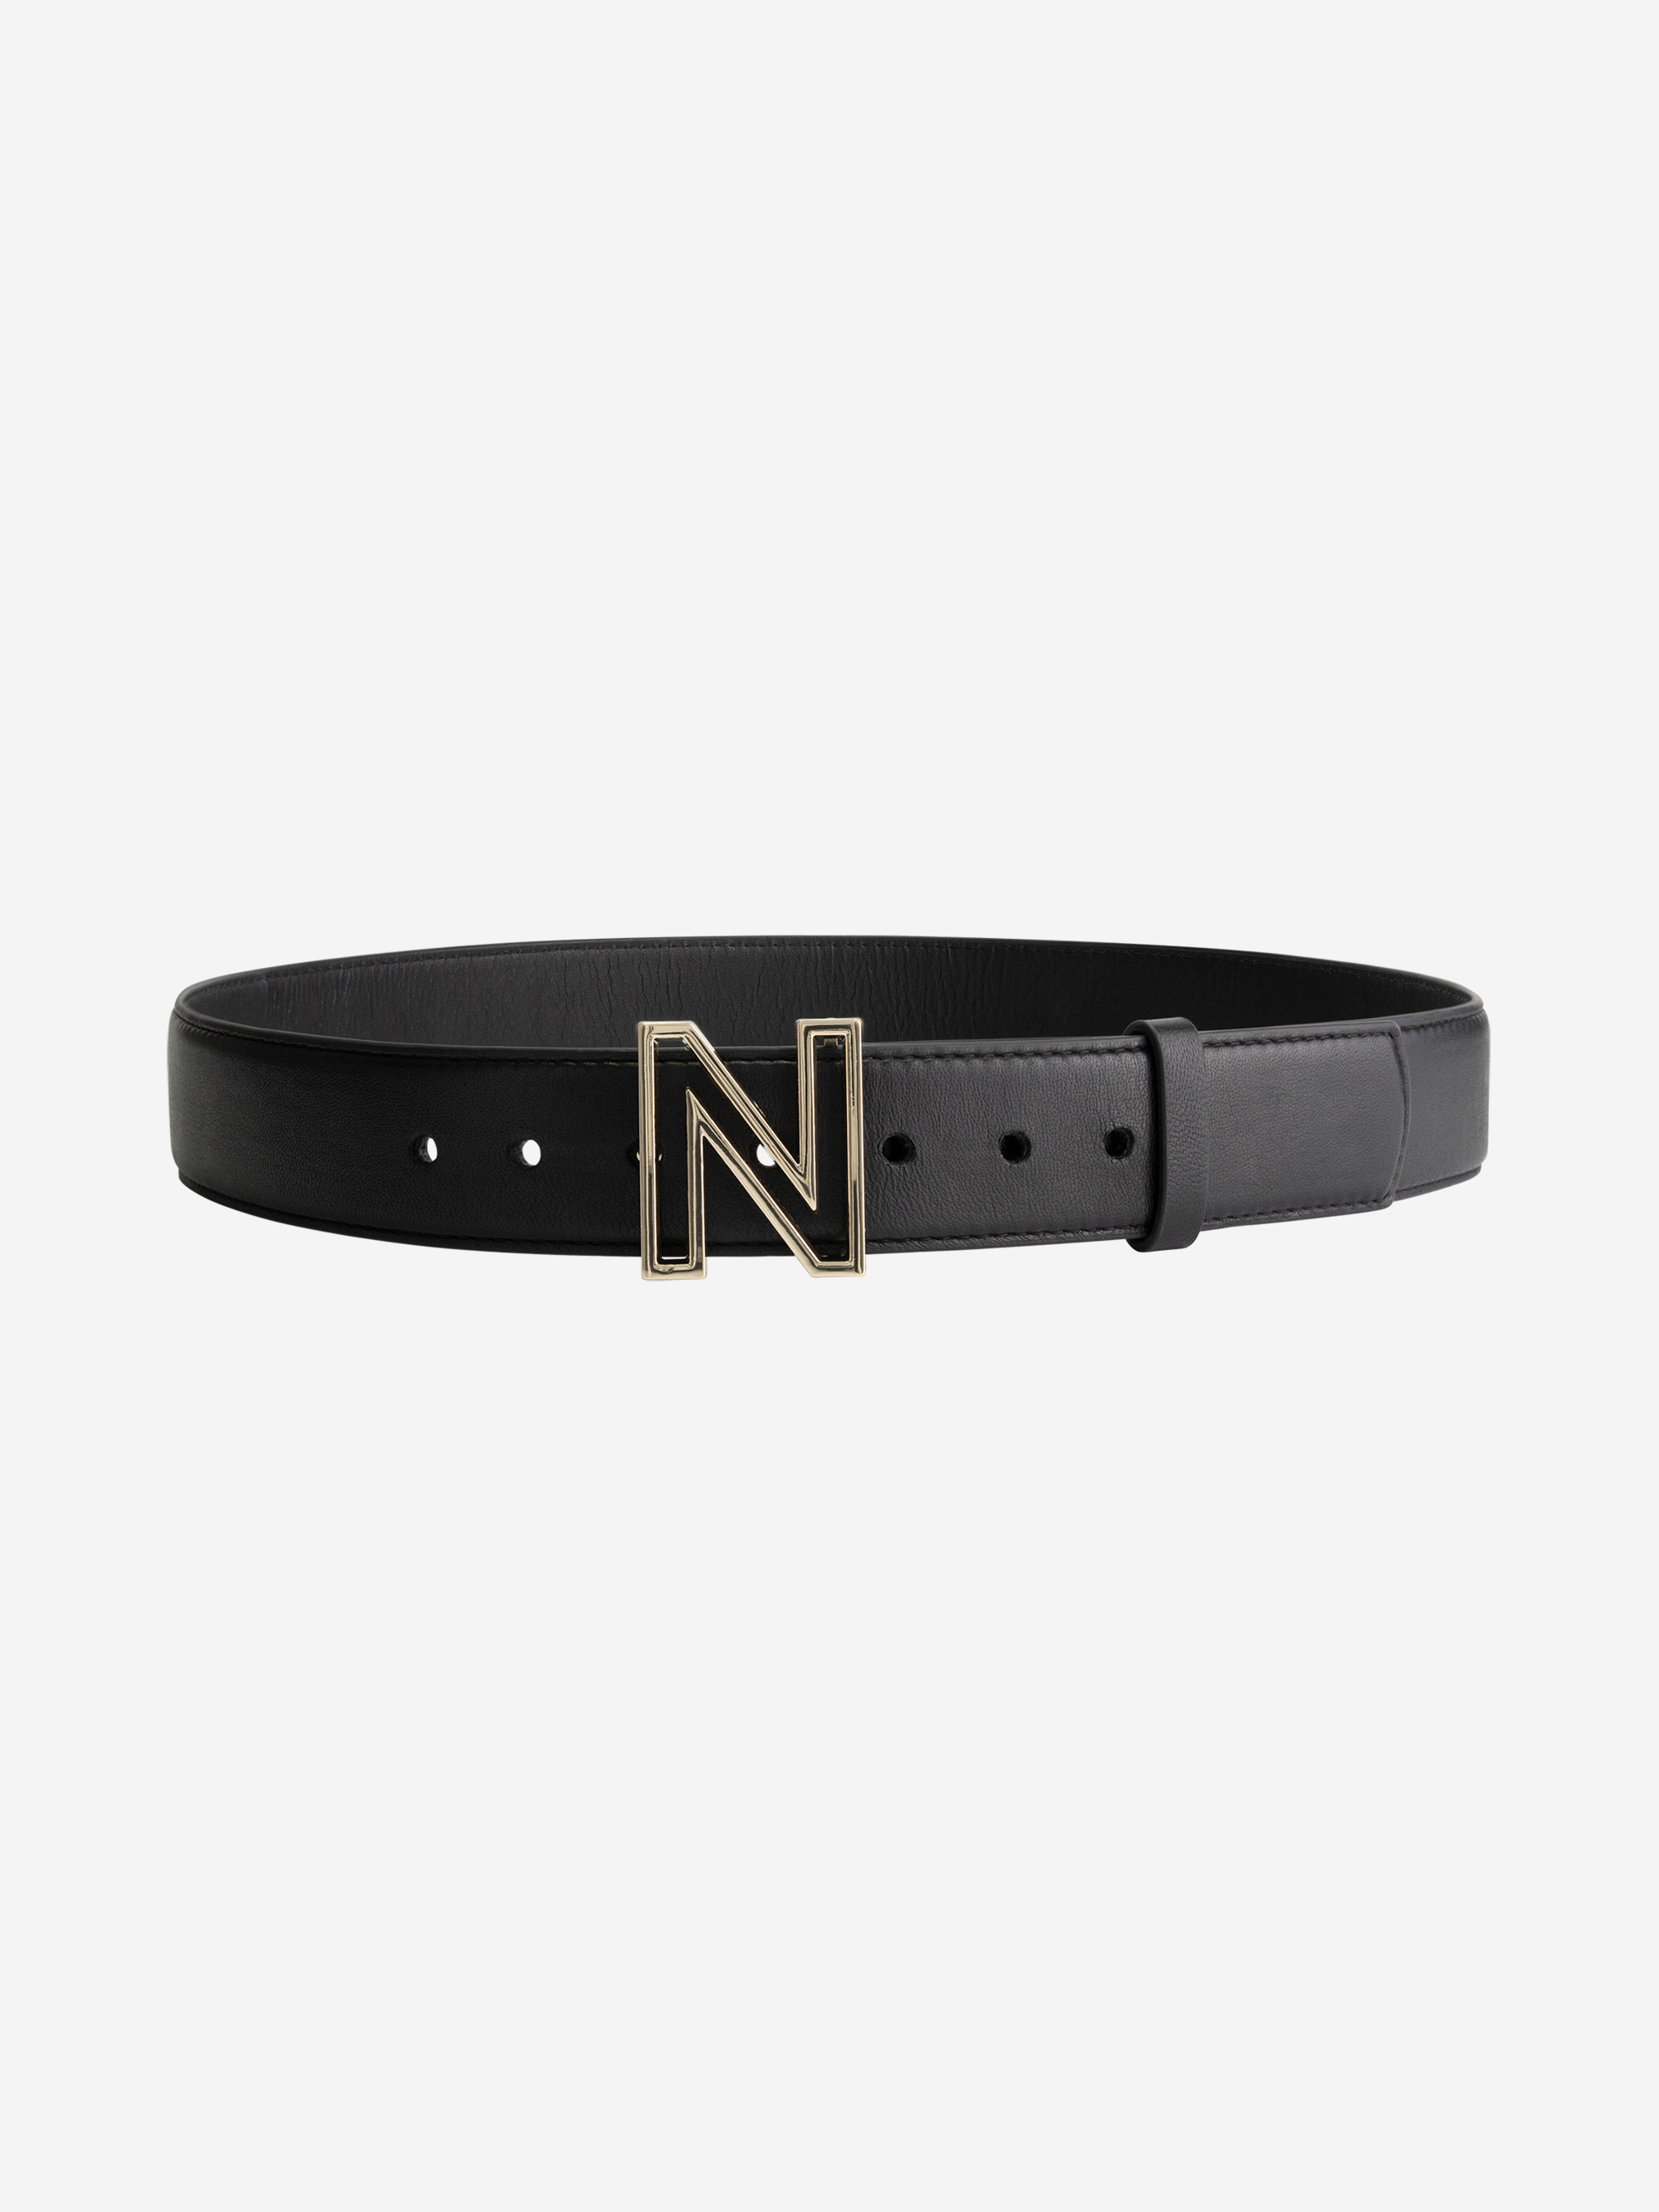 Leather belt with N buckle